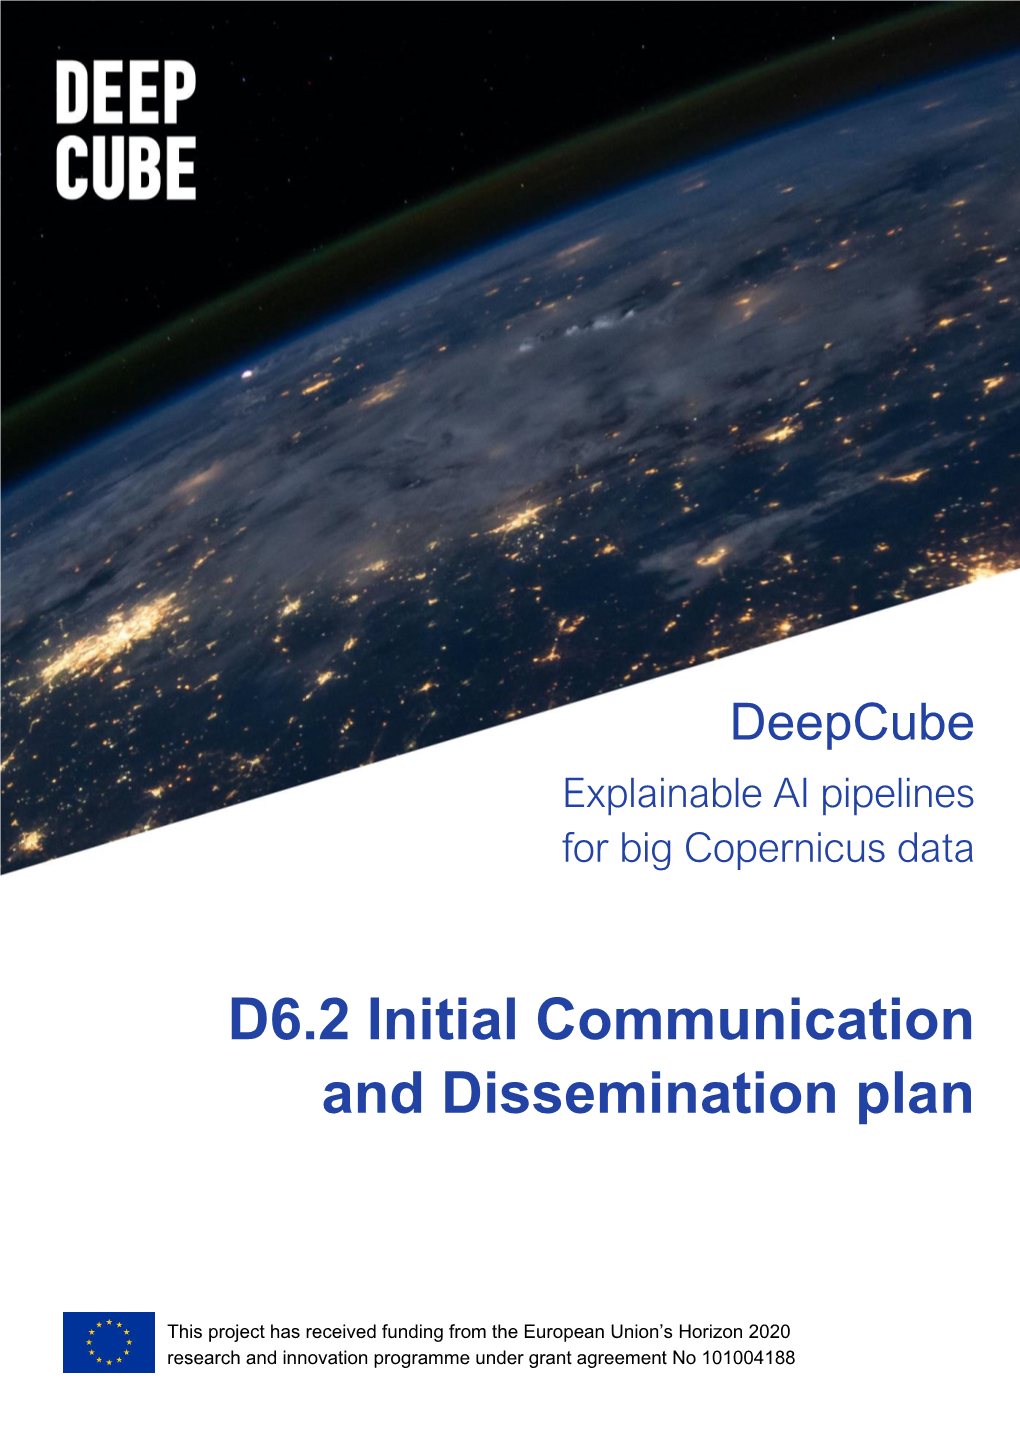 D6.2 Initial Communication and Dissemination Plan